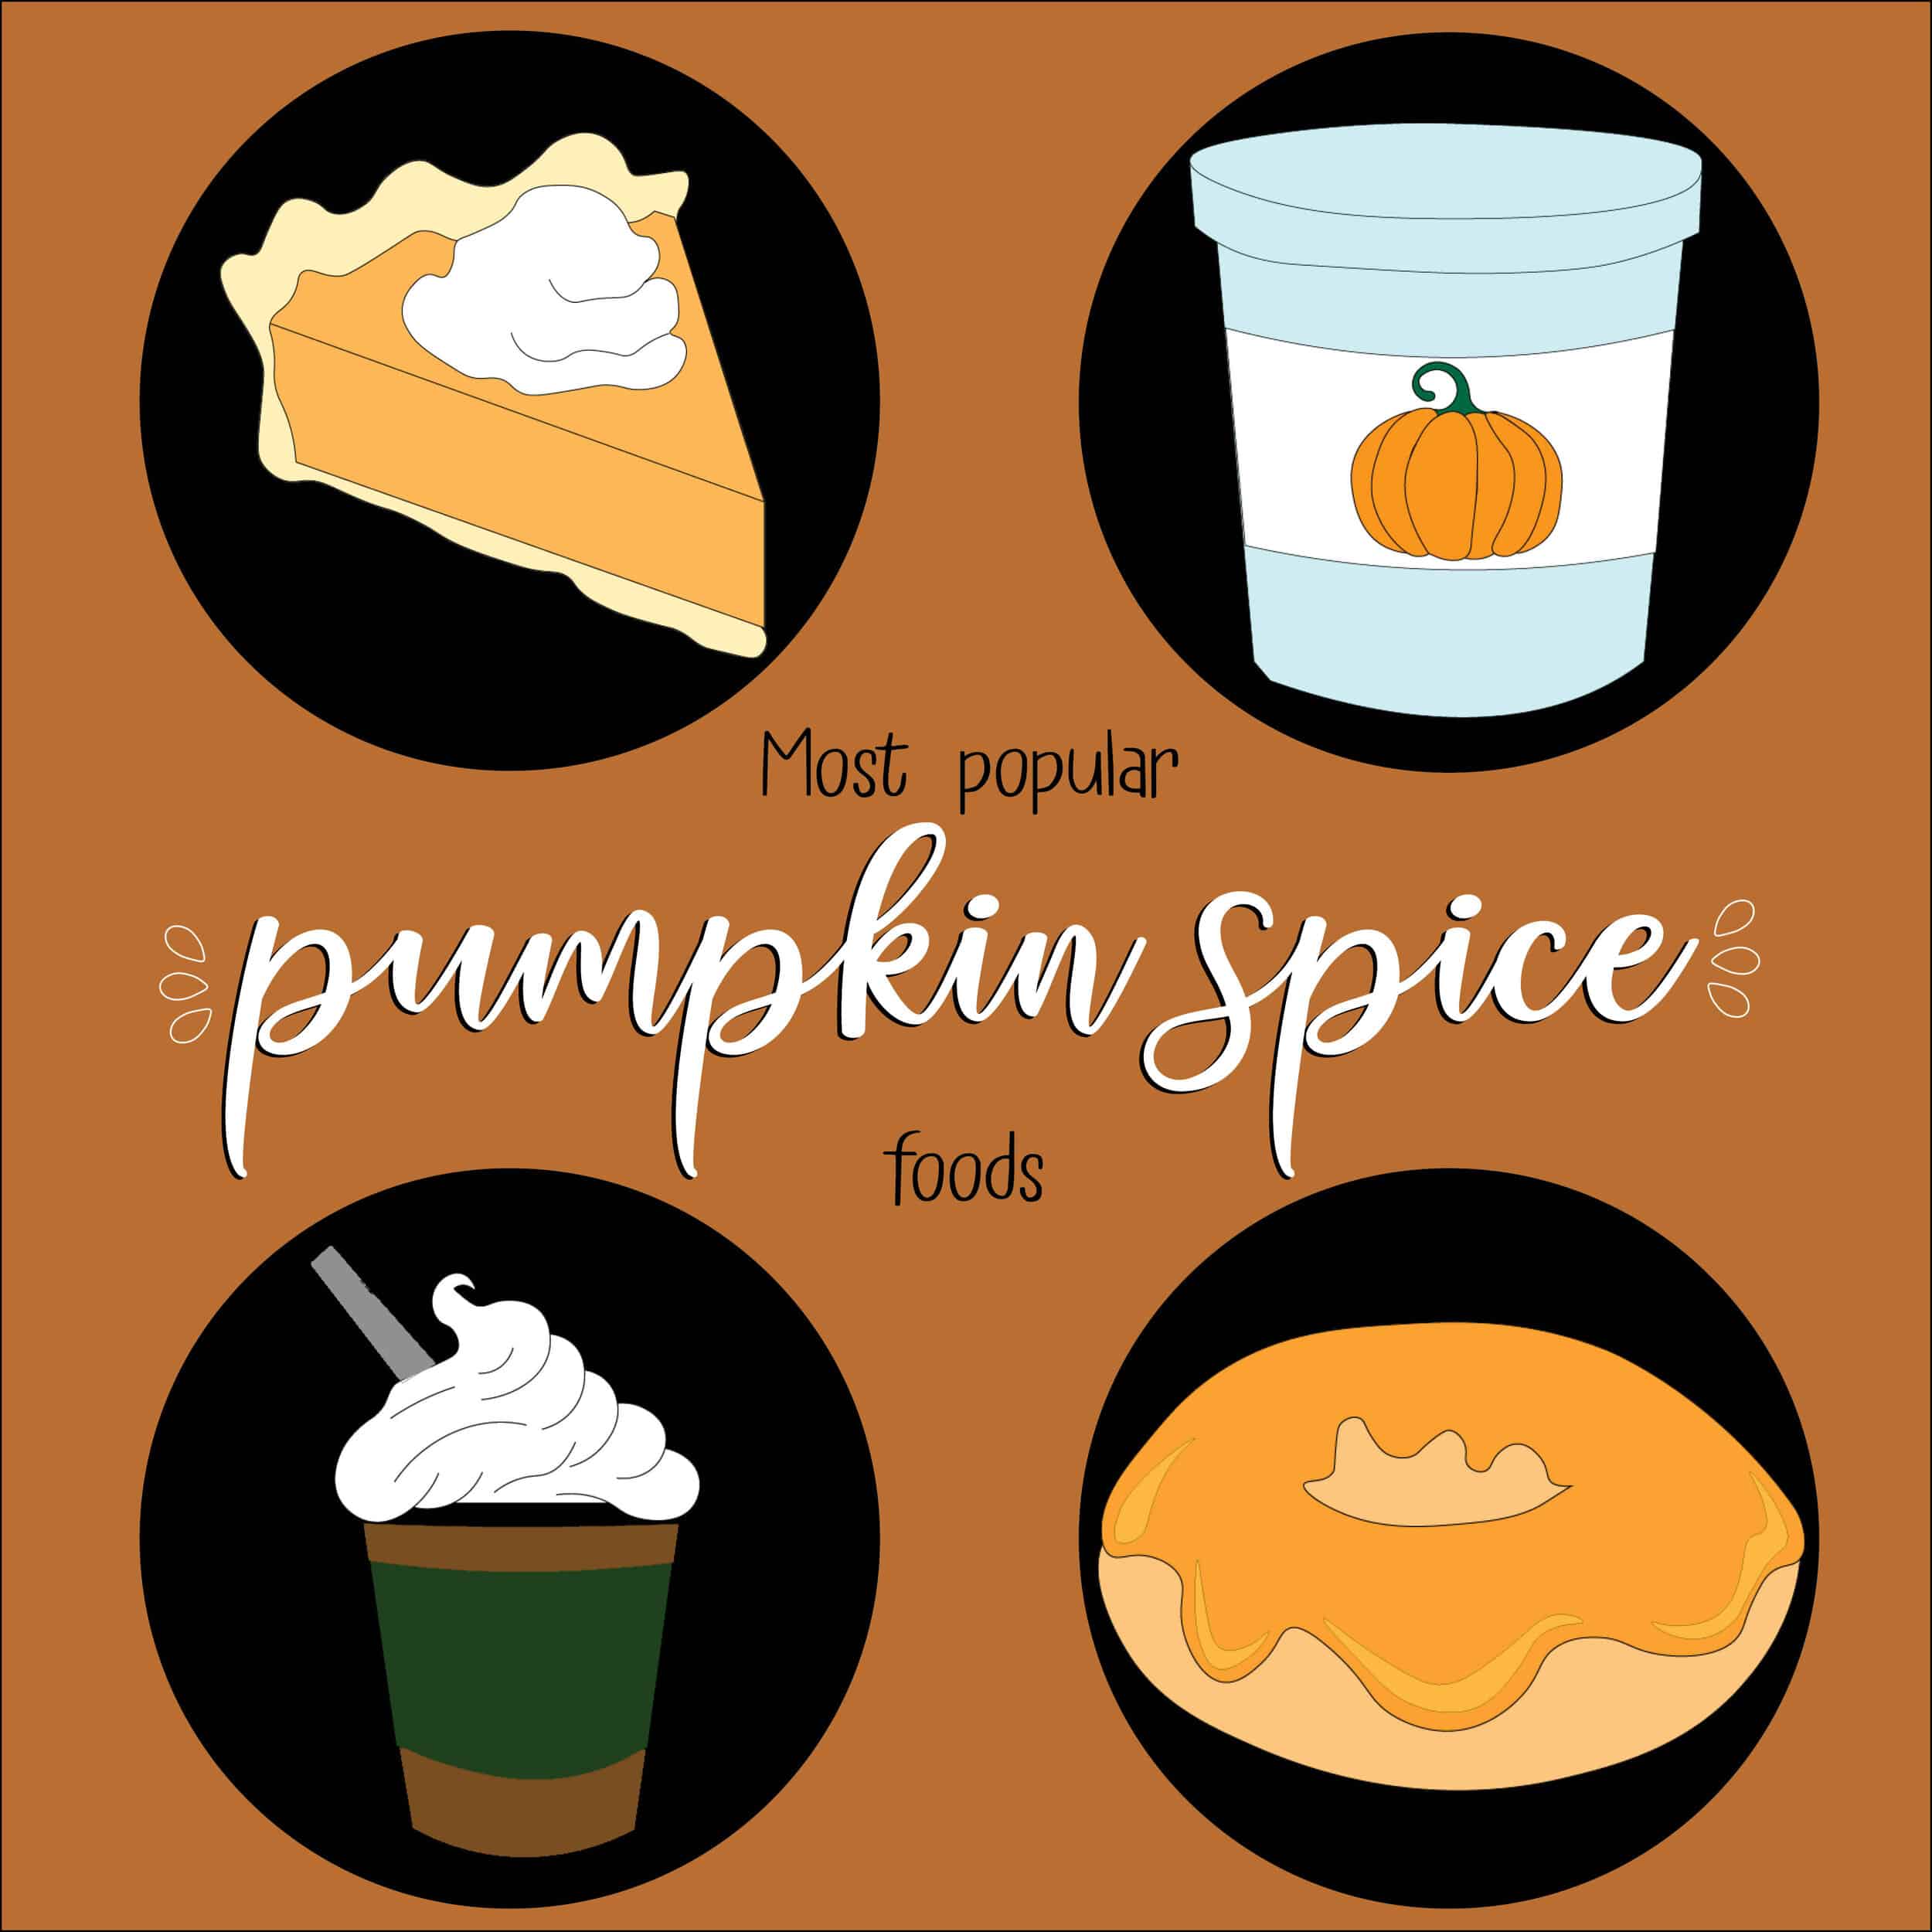 Fall is here and so is pumpkin spiced flavored everything. Above are shown the most famous pumpkin spiced flavored foods: pumpkin spice frappuccino, pumpkin spice donut, pumpkin spice pie, and pumpkin spice ice cream.